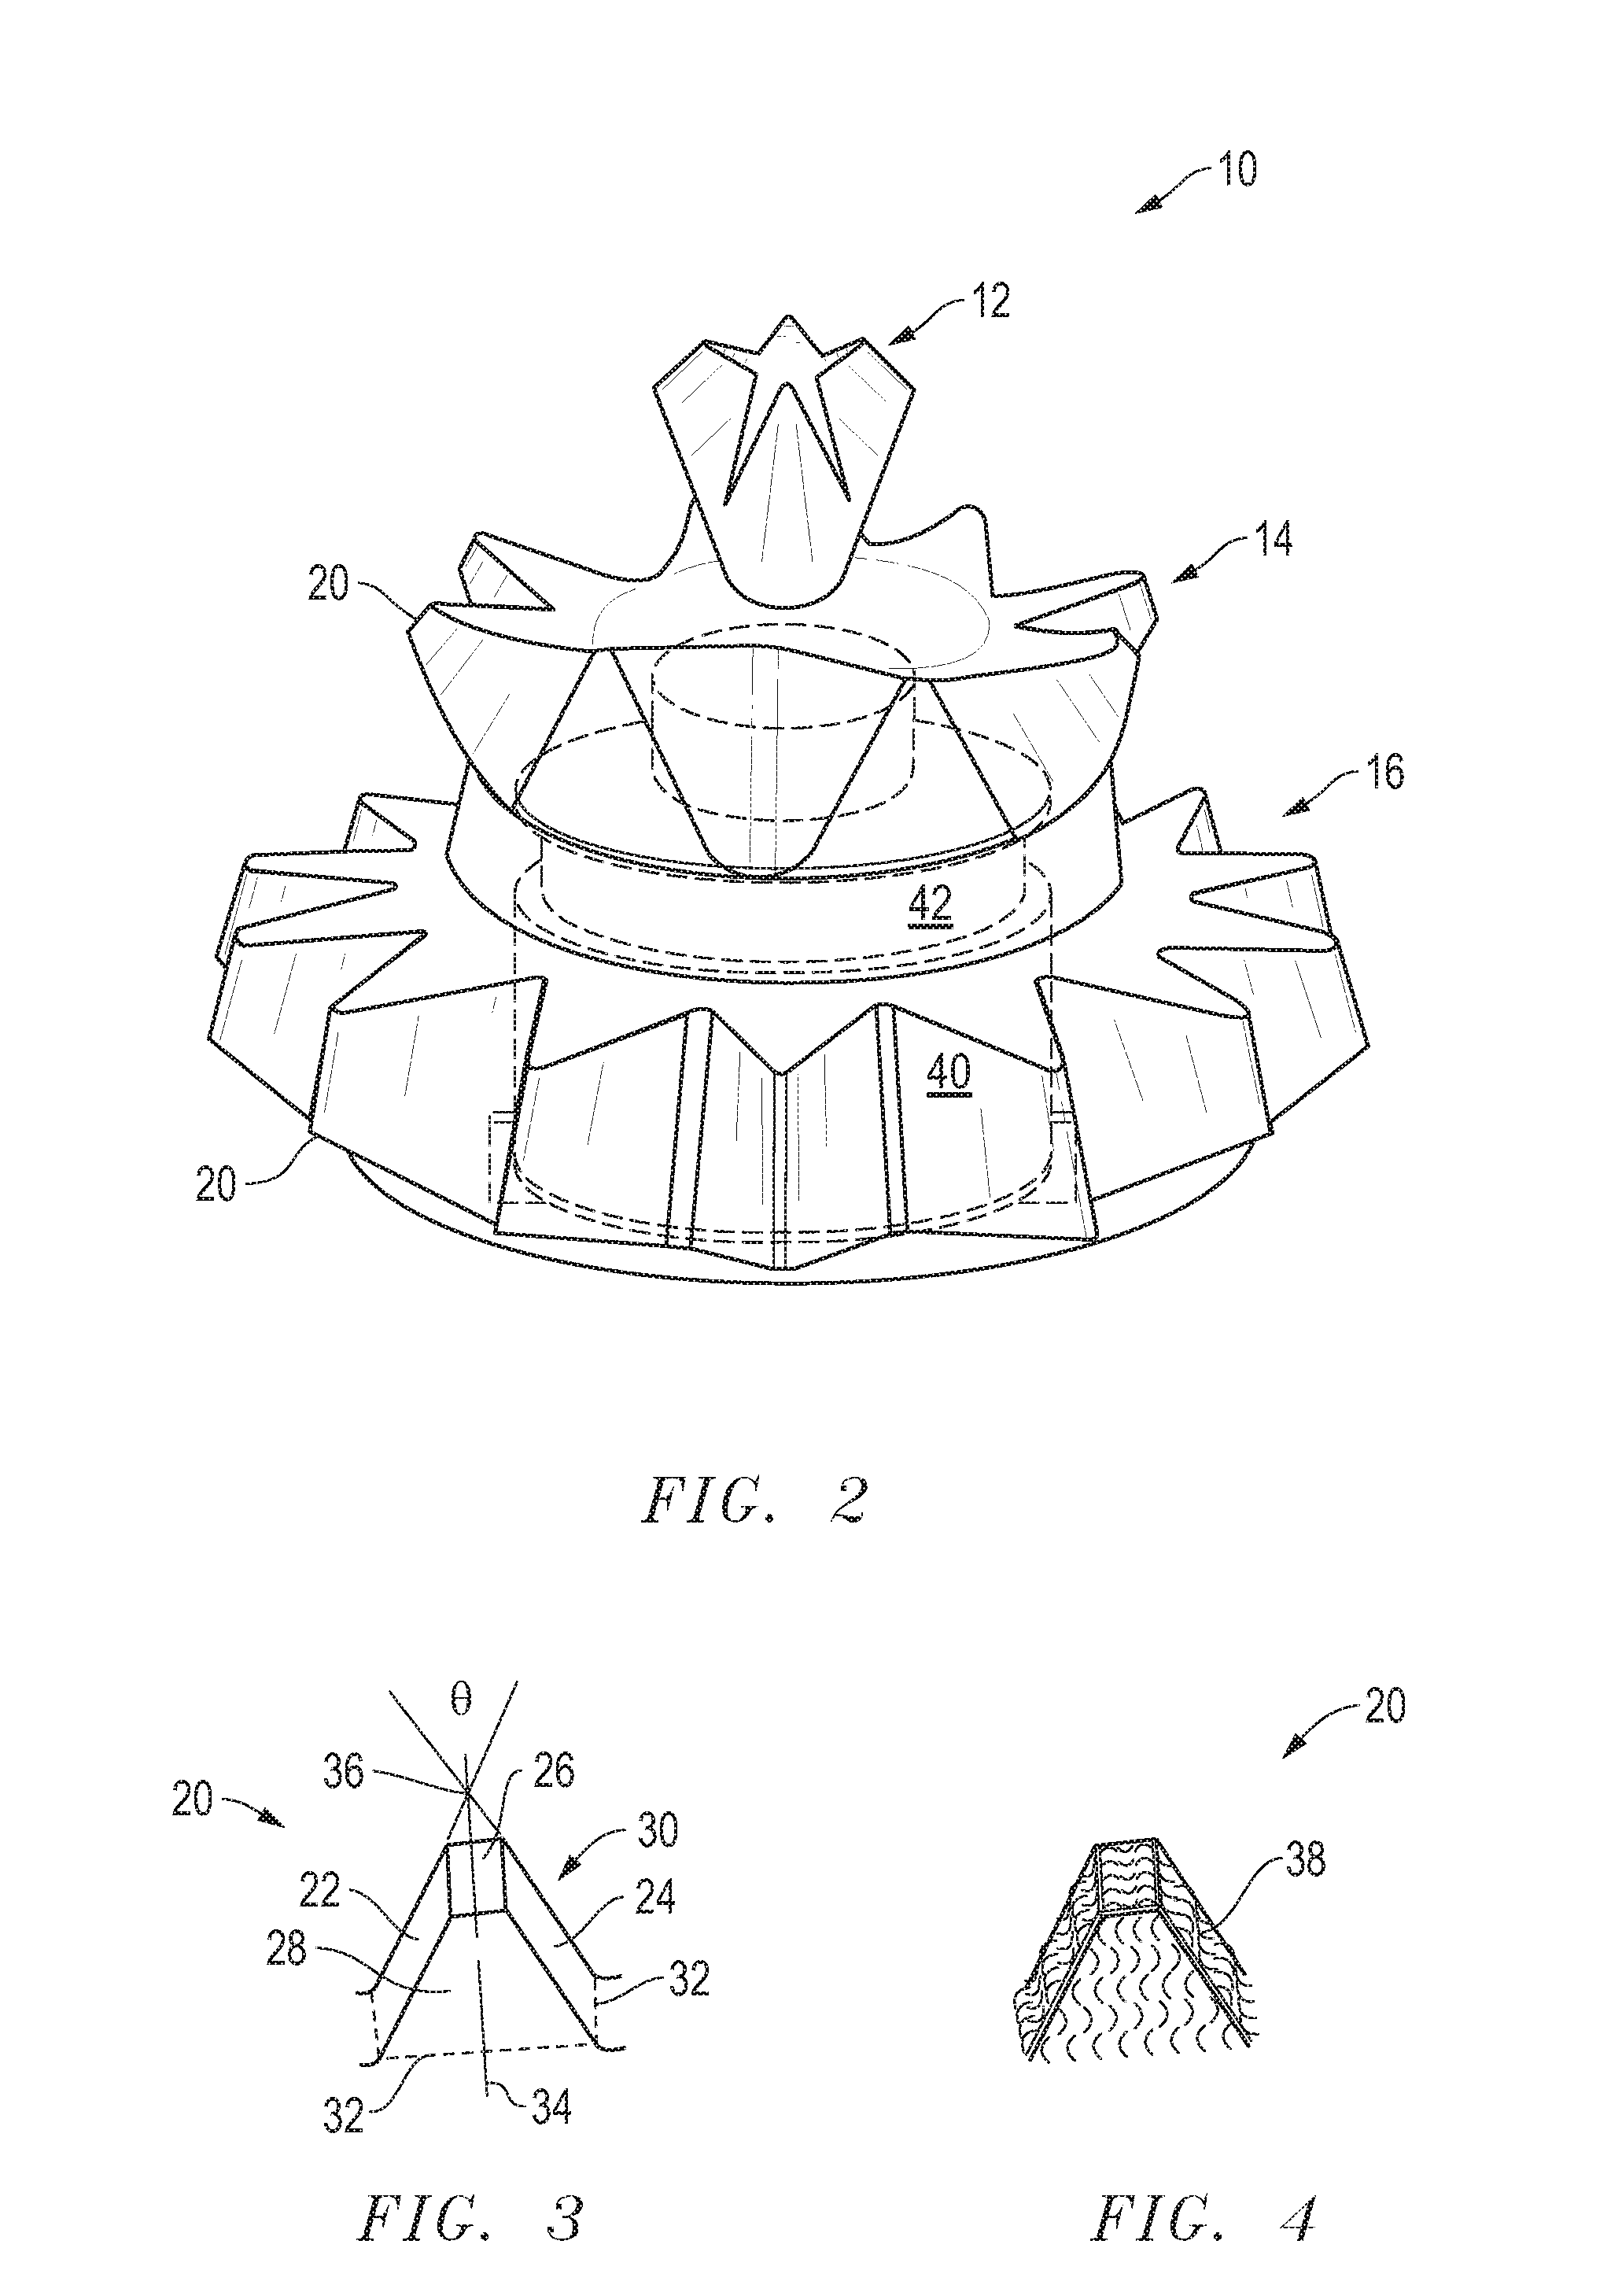 Method and Apparatus for the Automated Application of Hardfacing Material to Rolling Cutters of Earth-Boring Drill Bits